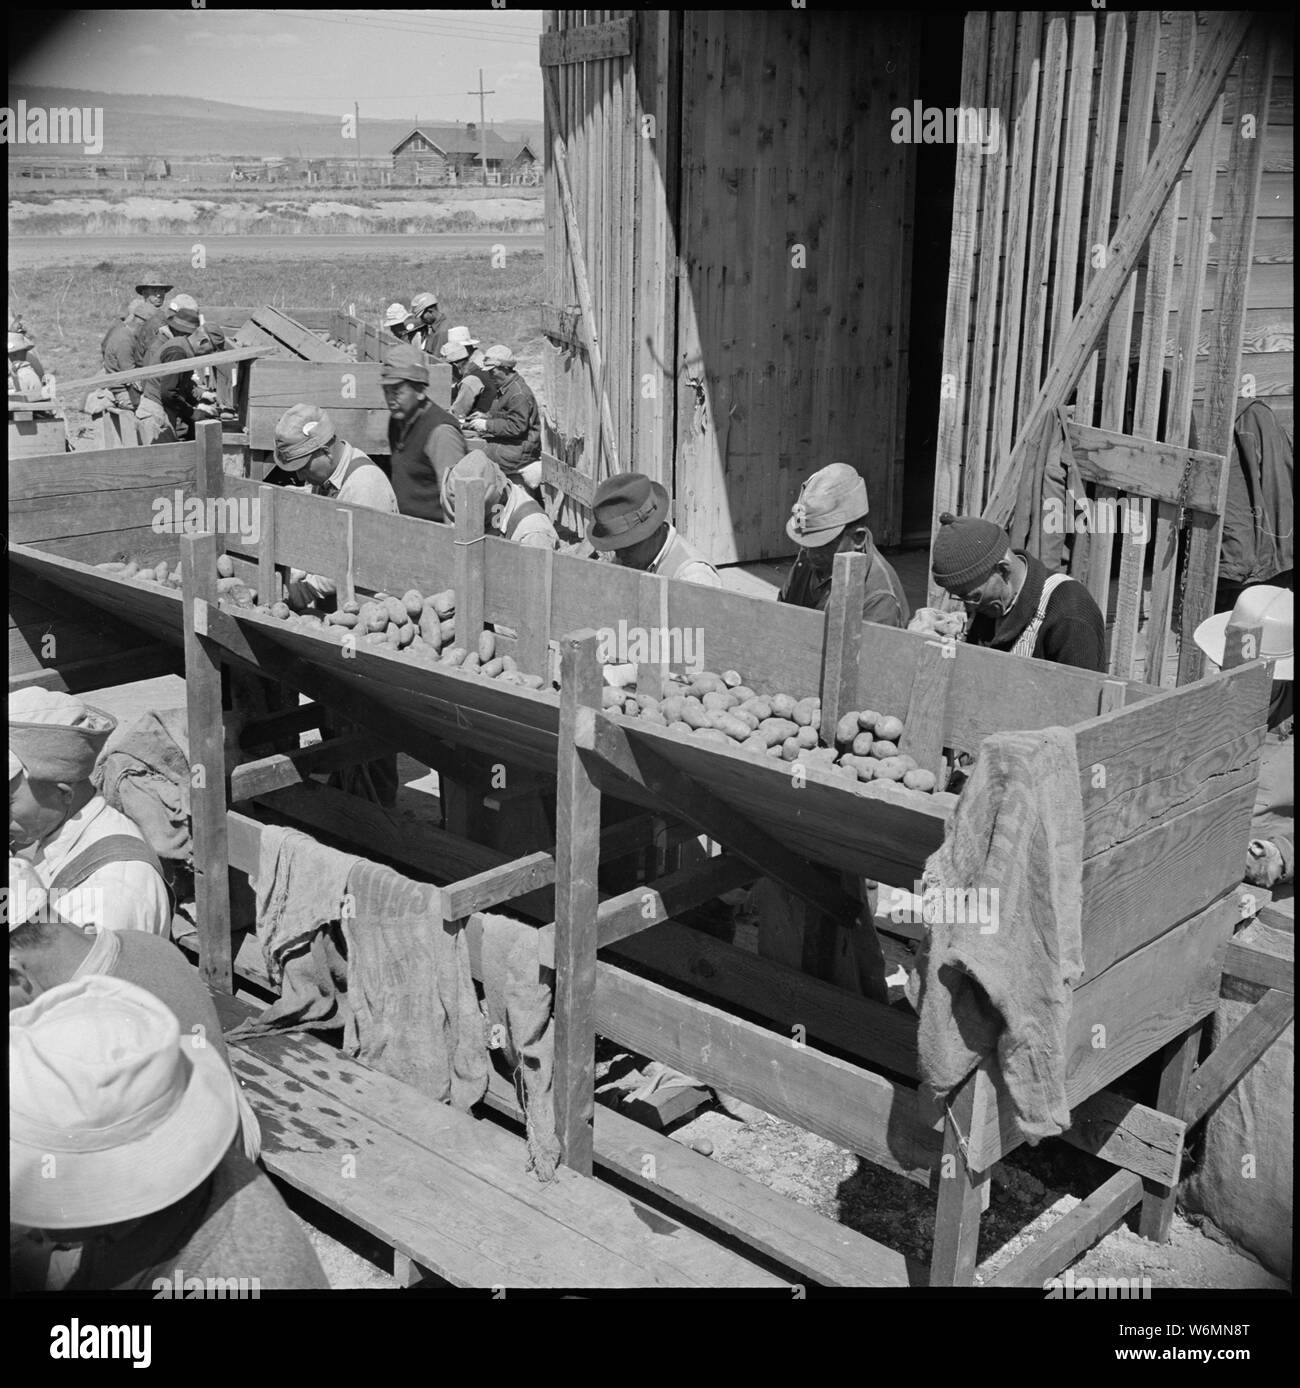 Tule Lake Relocation Center, Newell, California. Seed potato cutting at the cutting sheds of the Tu . . .; Scope and content:  The full caption for this photograph reads: Tule Lake Relocation Center, Newell, California. Seed potato cutting at the cutting sheds of the Tule Lake Relocation Center farm. 7,500 sacks of potatoes will be cut by the 48 workers in 2-1/2 weeks. This will be enough seeds to plant the 600 acres. Stock Photo